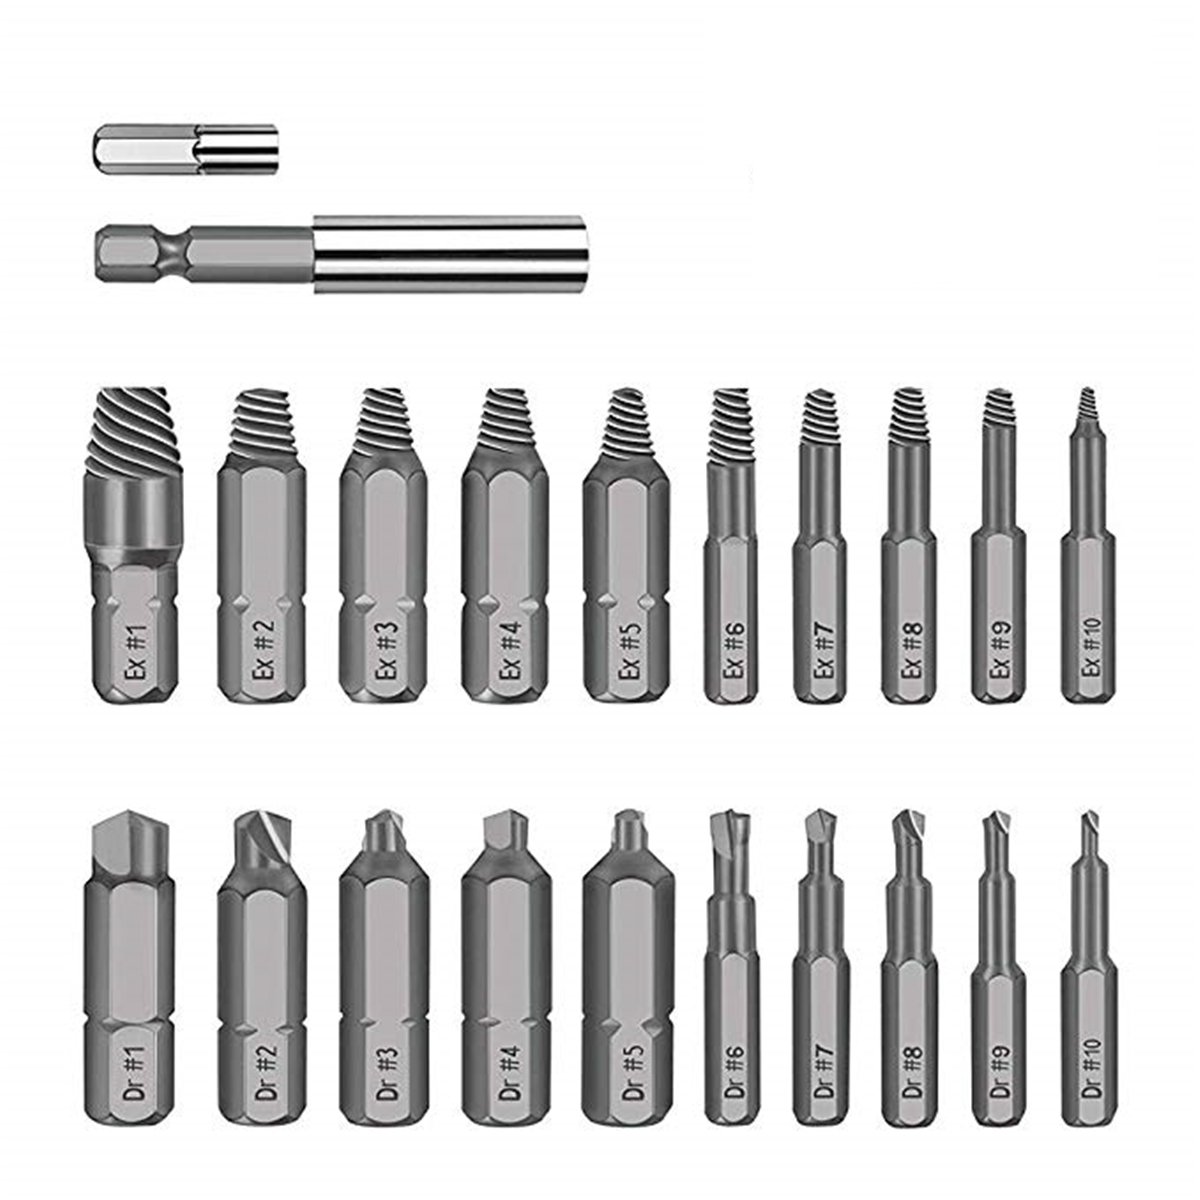 Drillpro-22pcs-Damaged-Screw-Extractor-Set-for-Broken-Screw-HSS-Broken-Bolt-Extractor-Screw-Remover--1584557-2